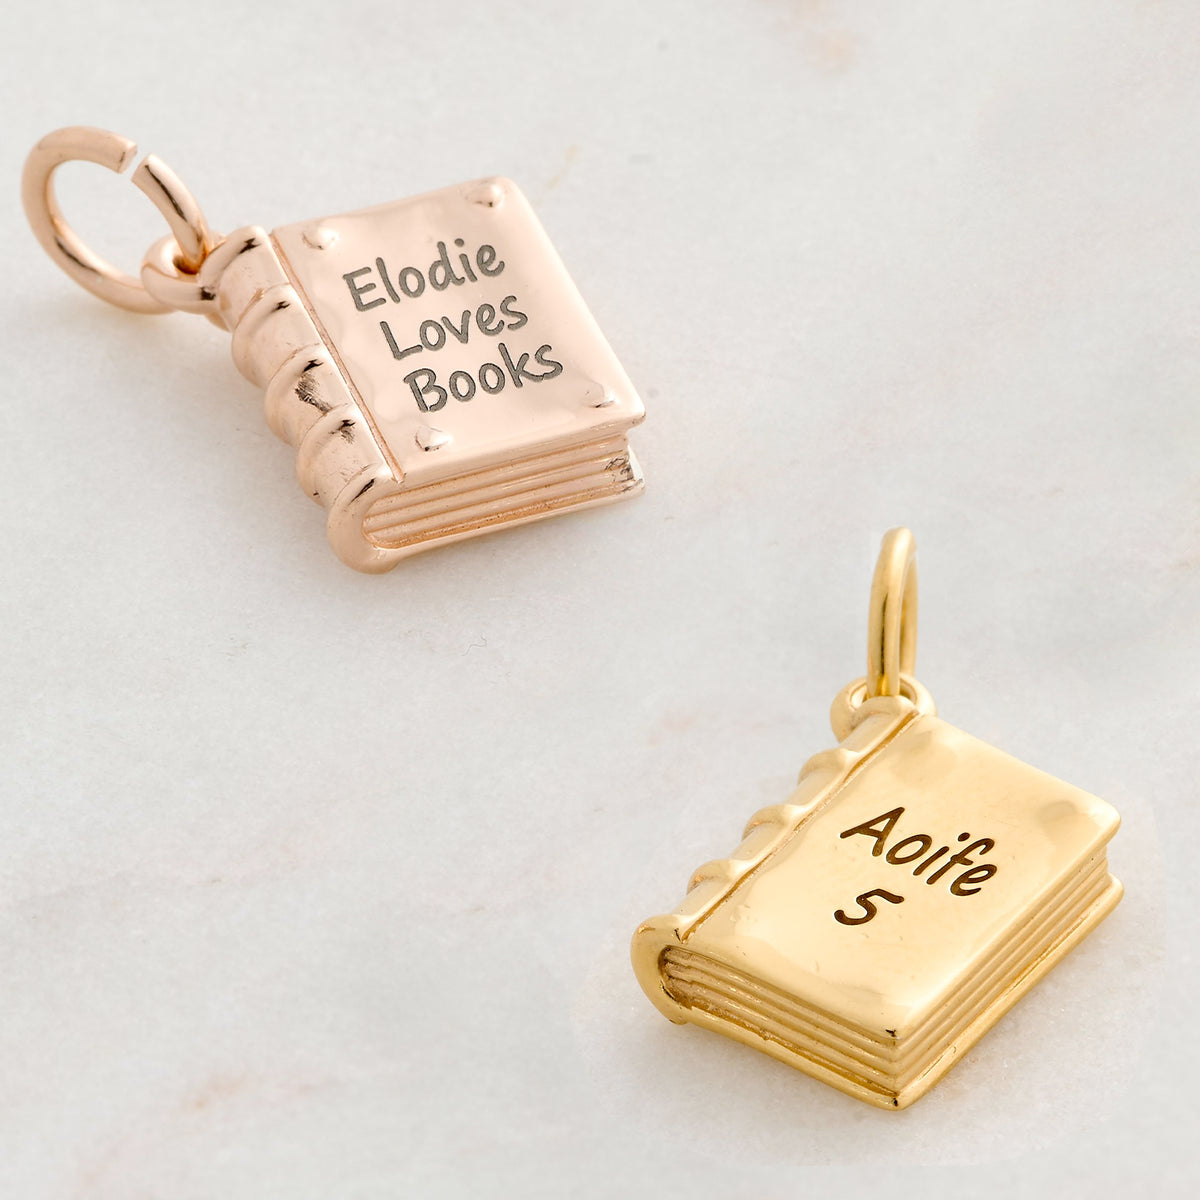 gold plated silver book charm engraved with date for birthday gift charm for avid reader bookworm librarian